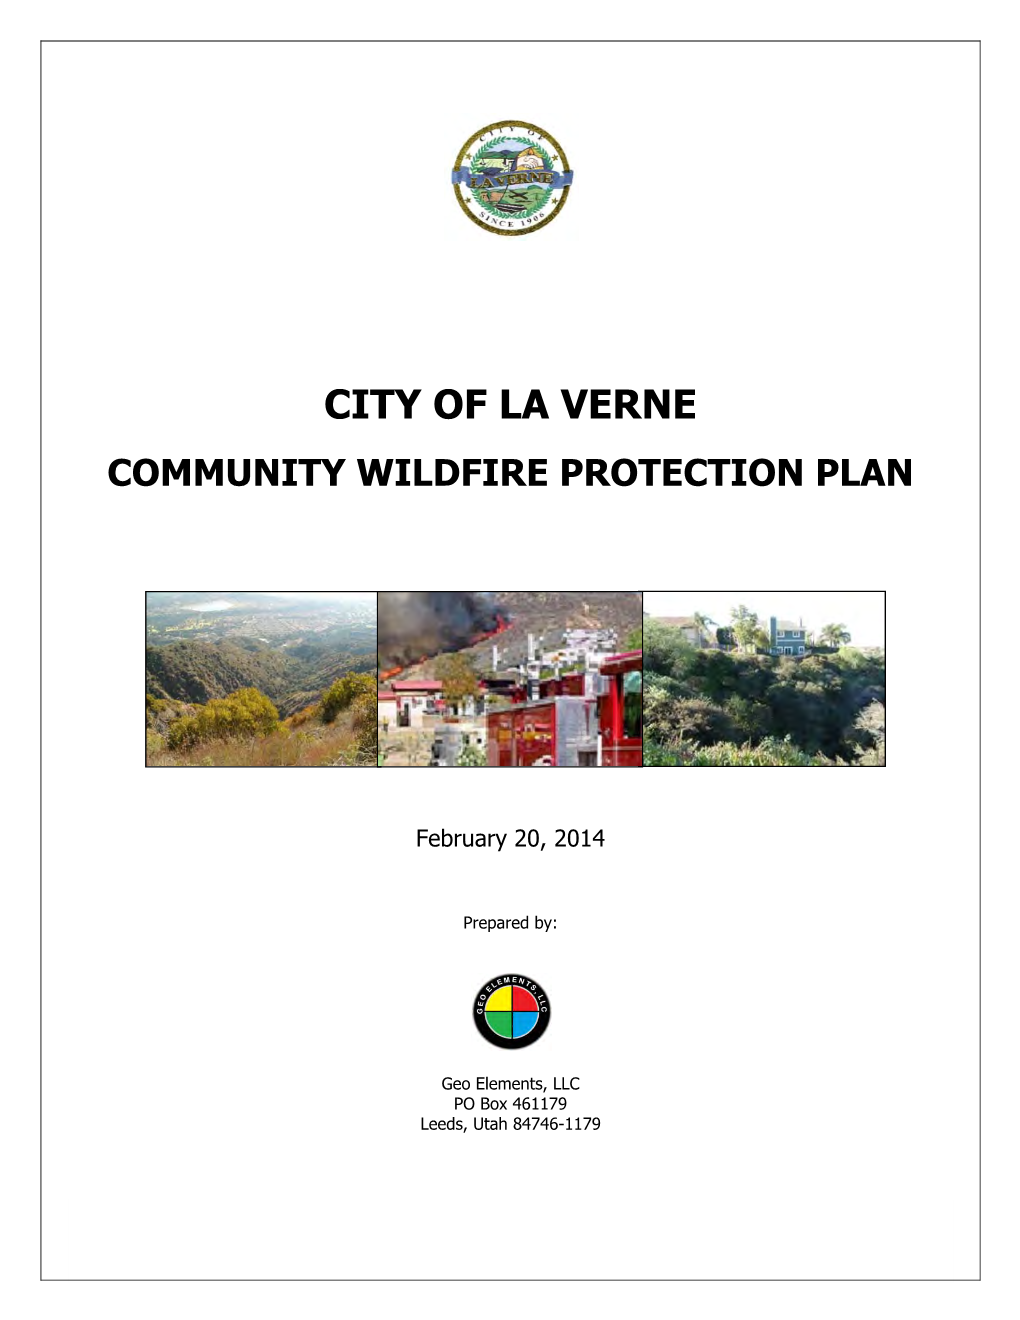 City of La Verne Community Wildfire Protection Plan